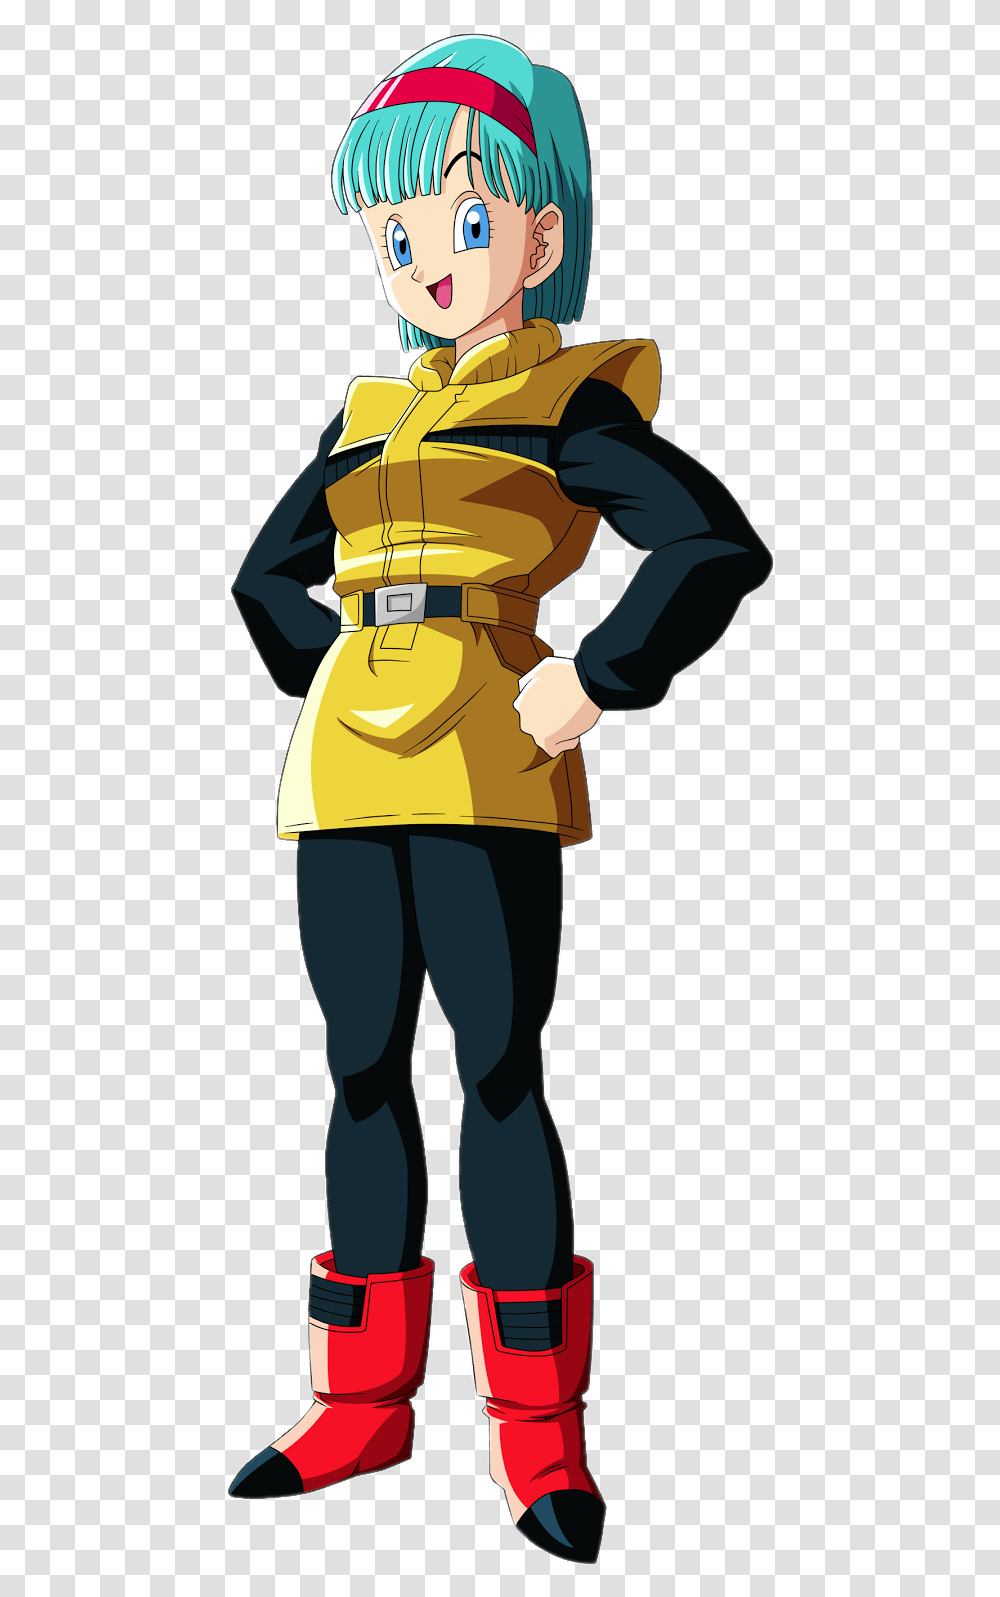 Check Out This Dragon Ball Character Bulma As Anime Smile, Clothing, Apparel, Coat, Sleeve Transparent Png